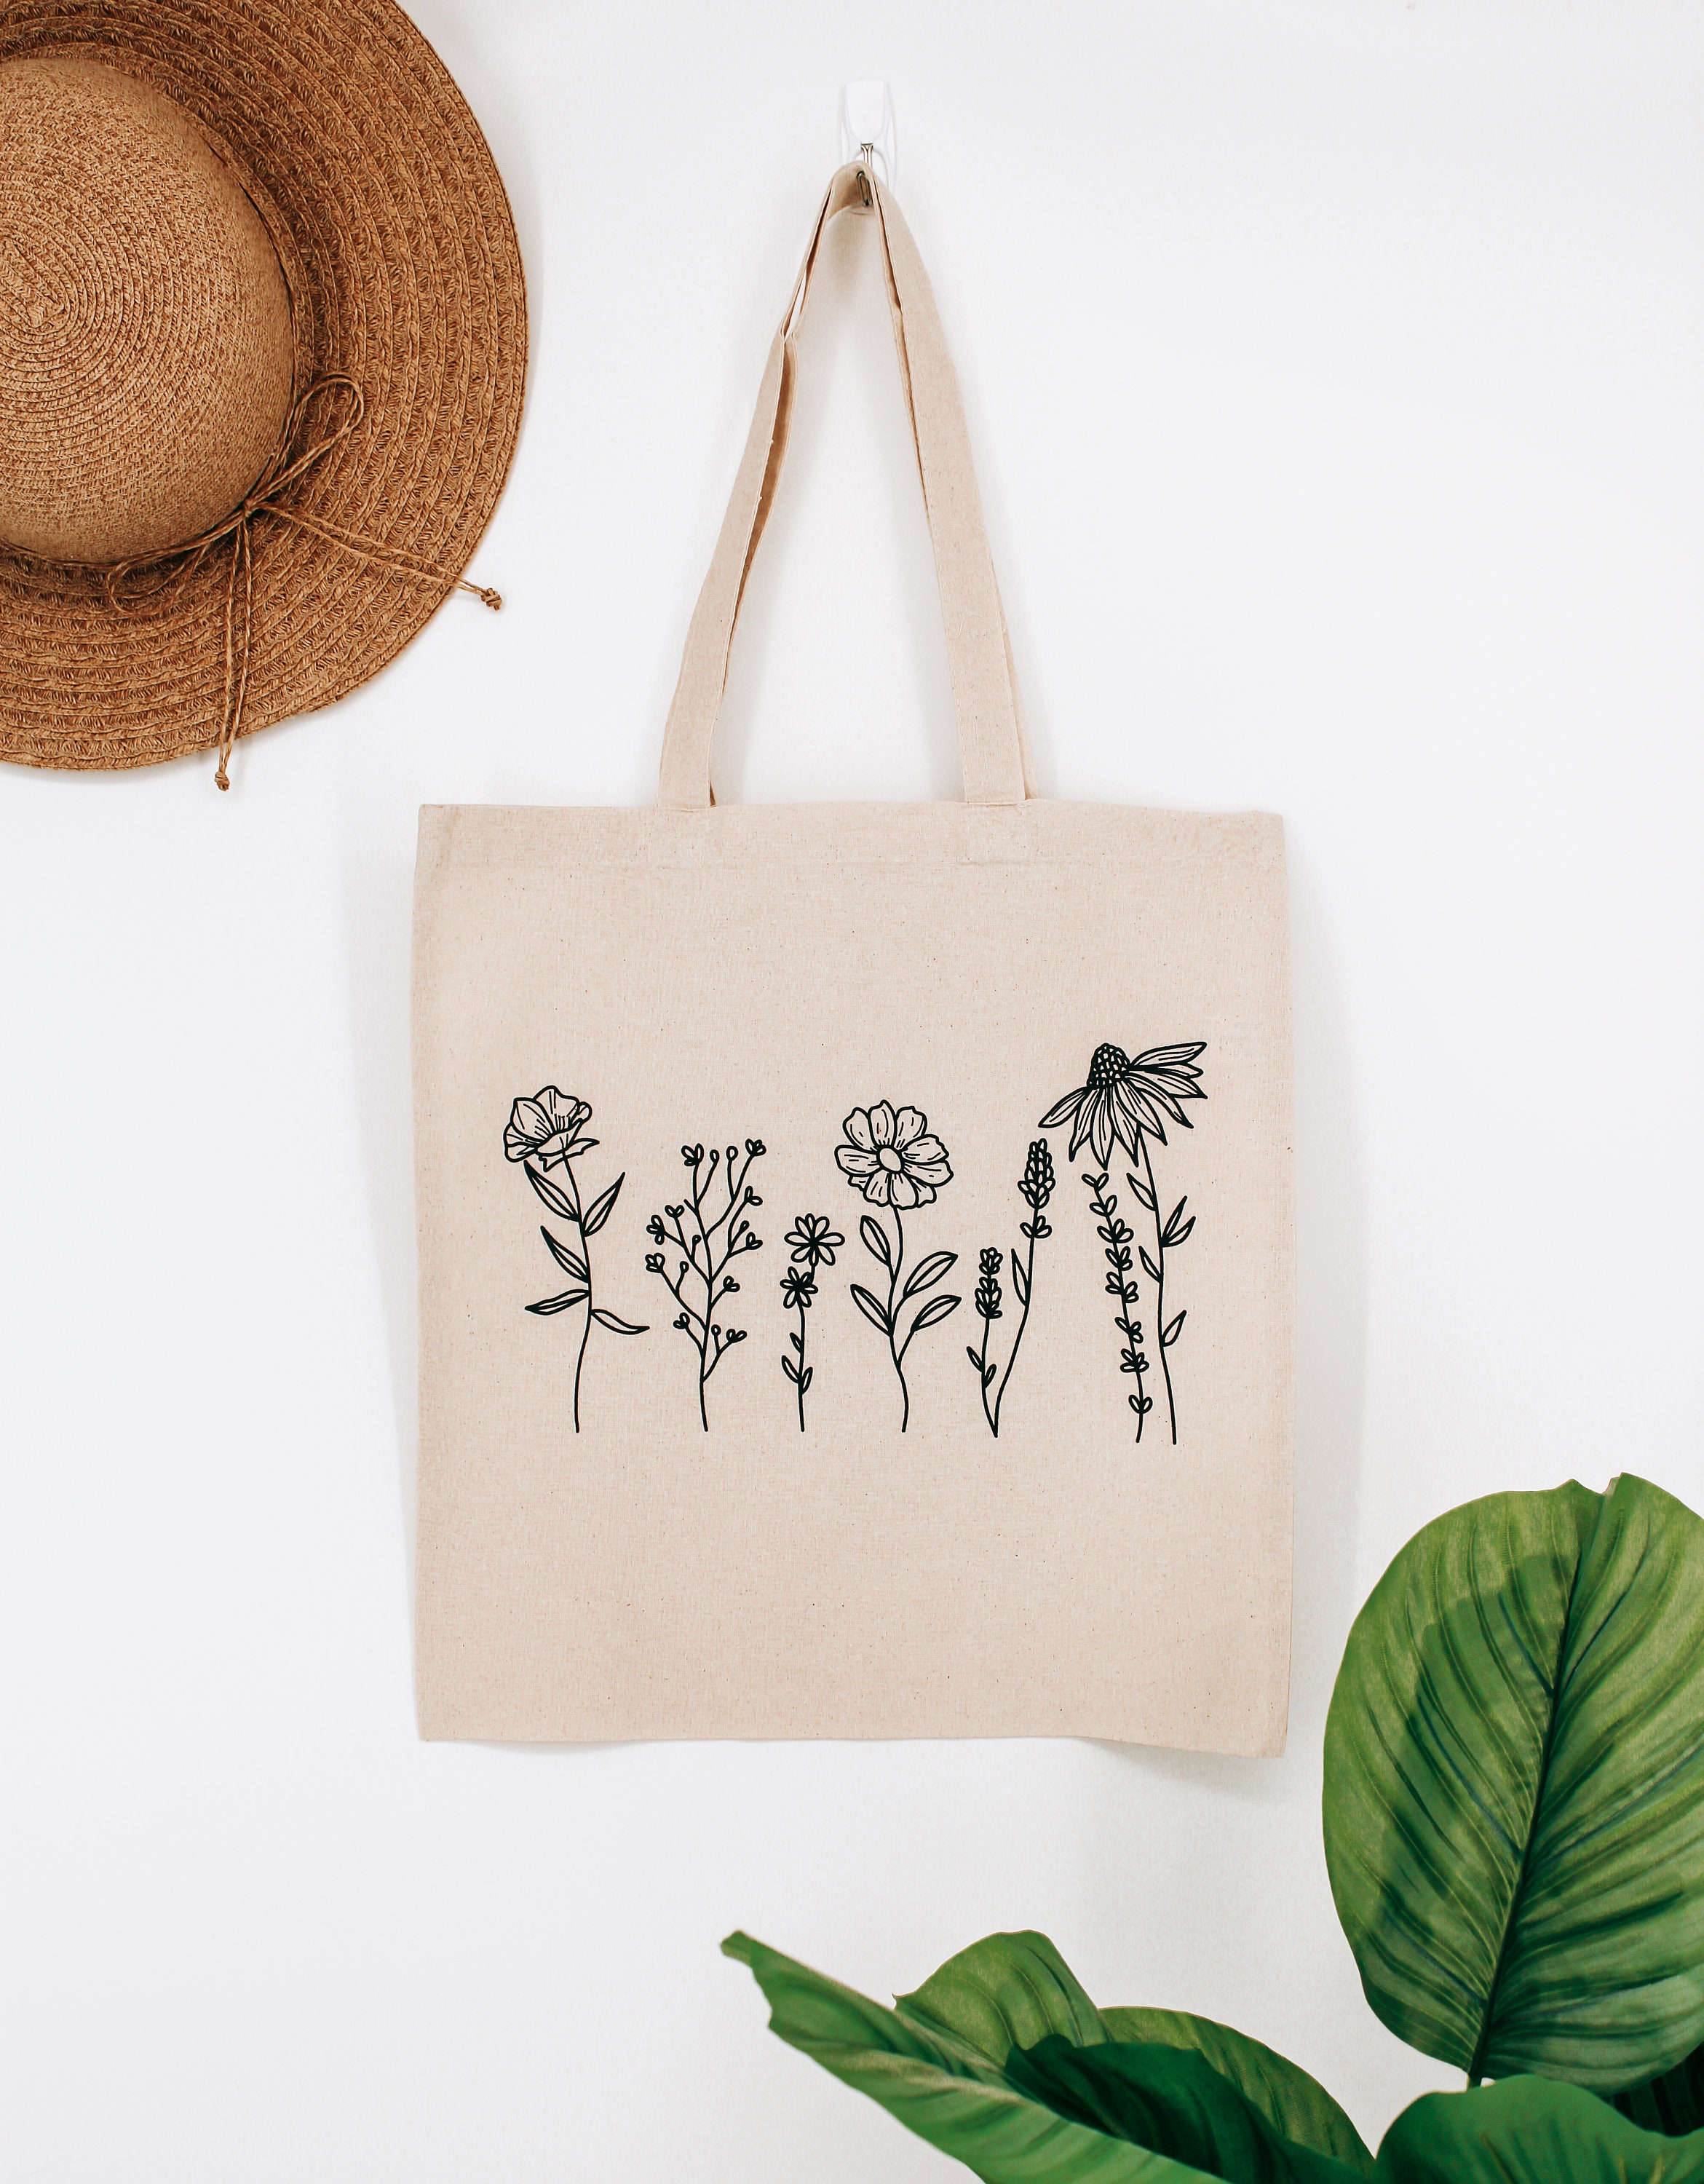 Wildflower Tote Bag Cotton Canvas Tote Bag Shopping Bag | Etsy